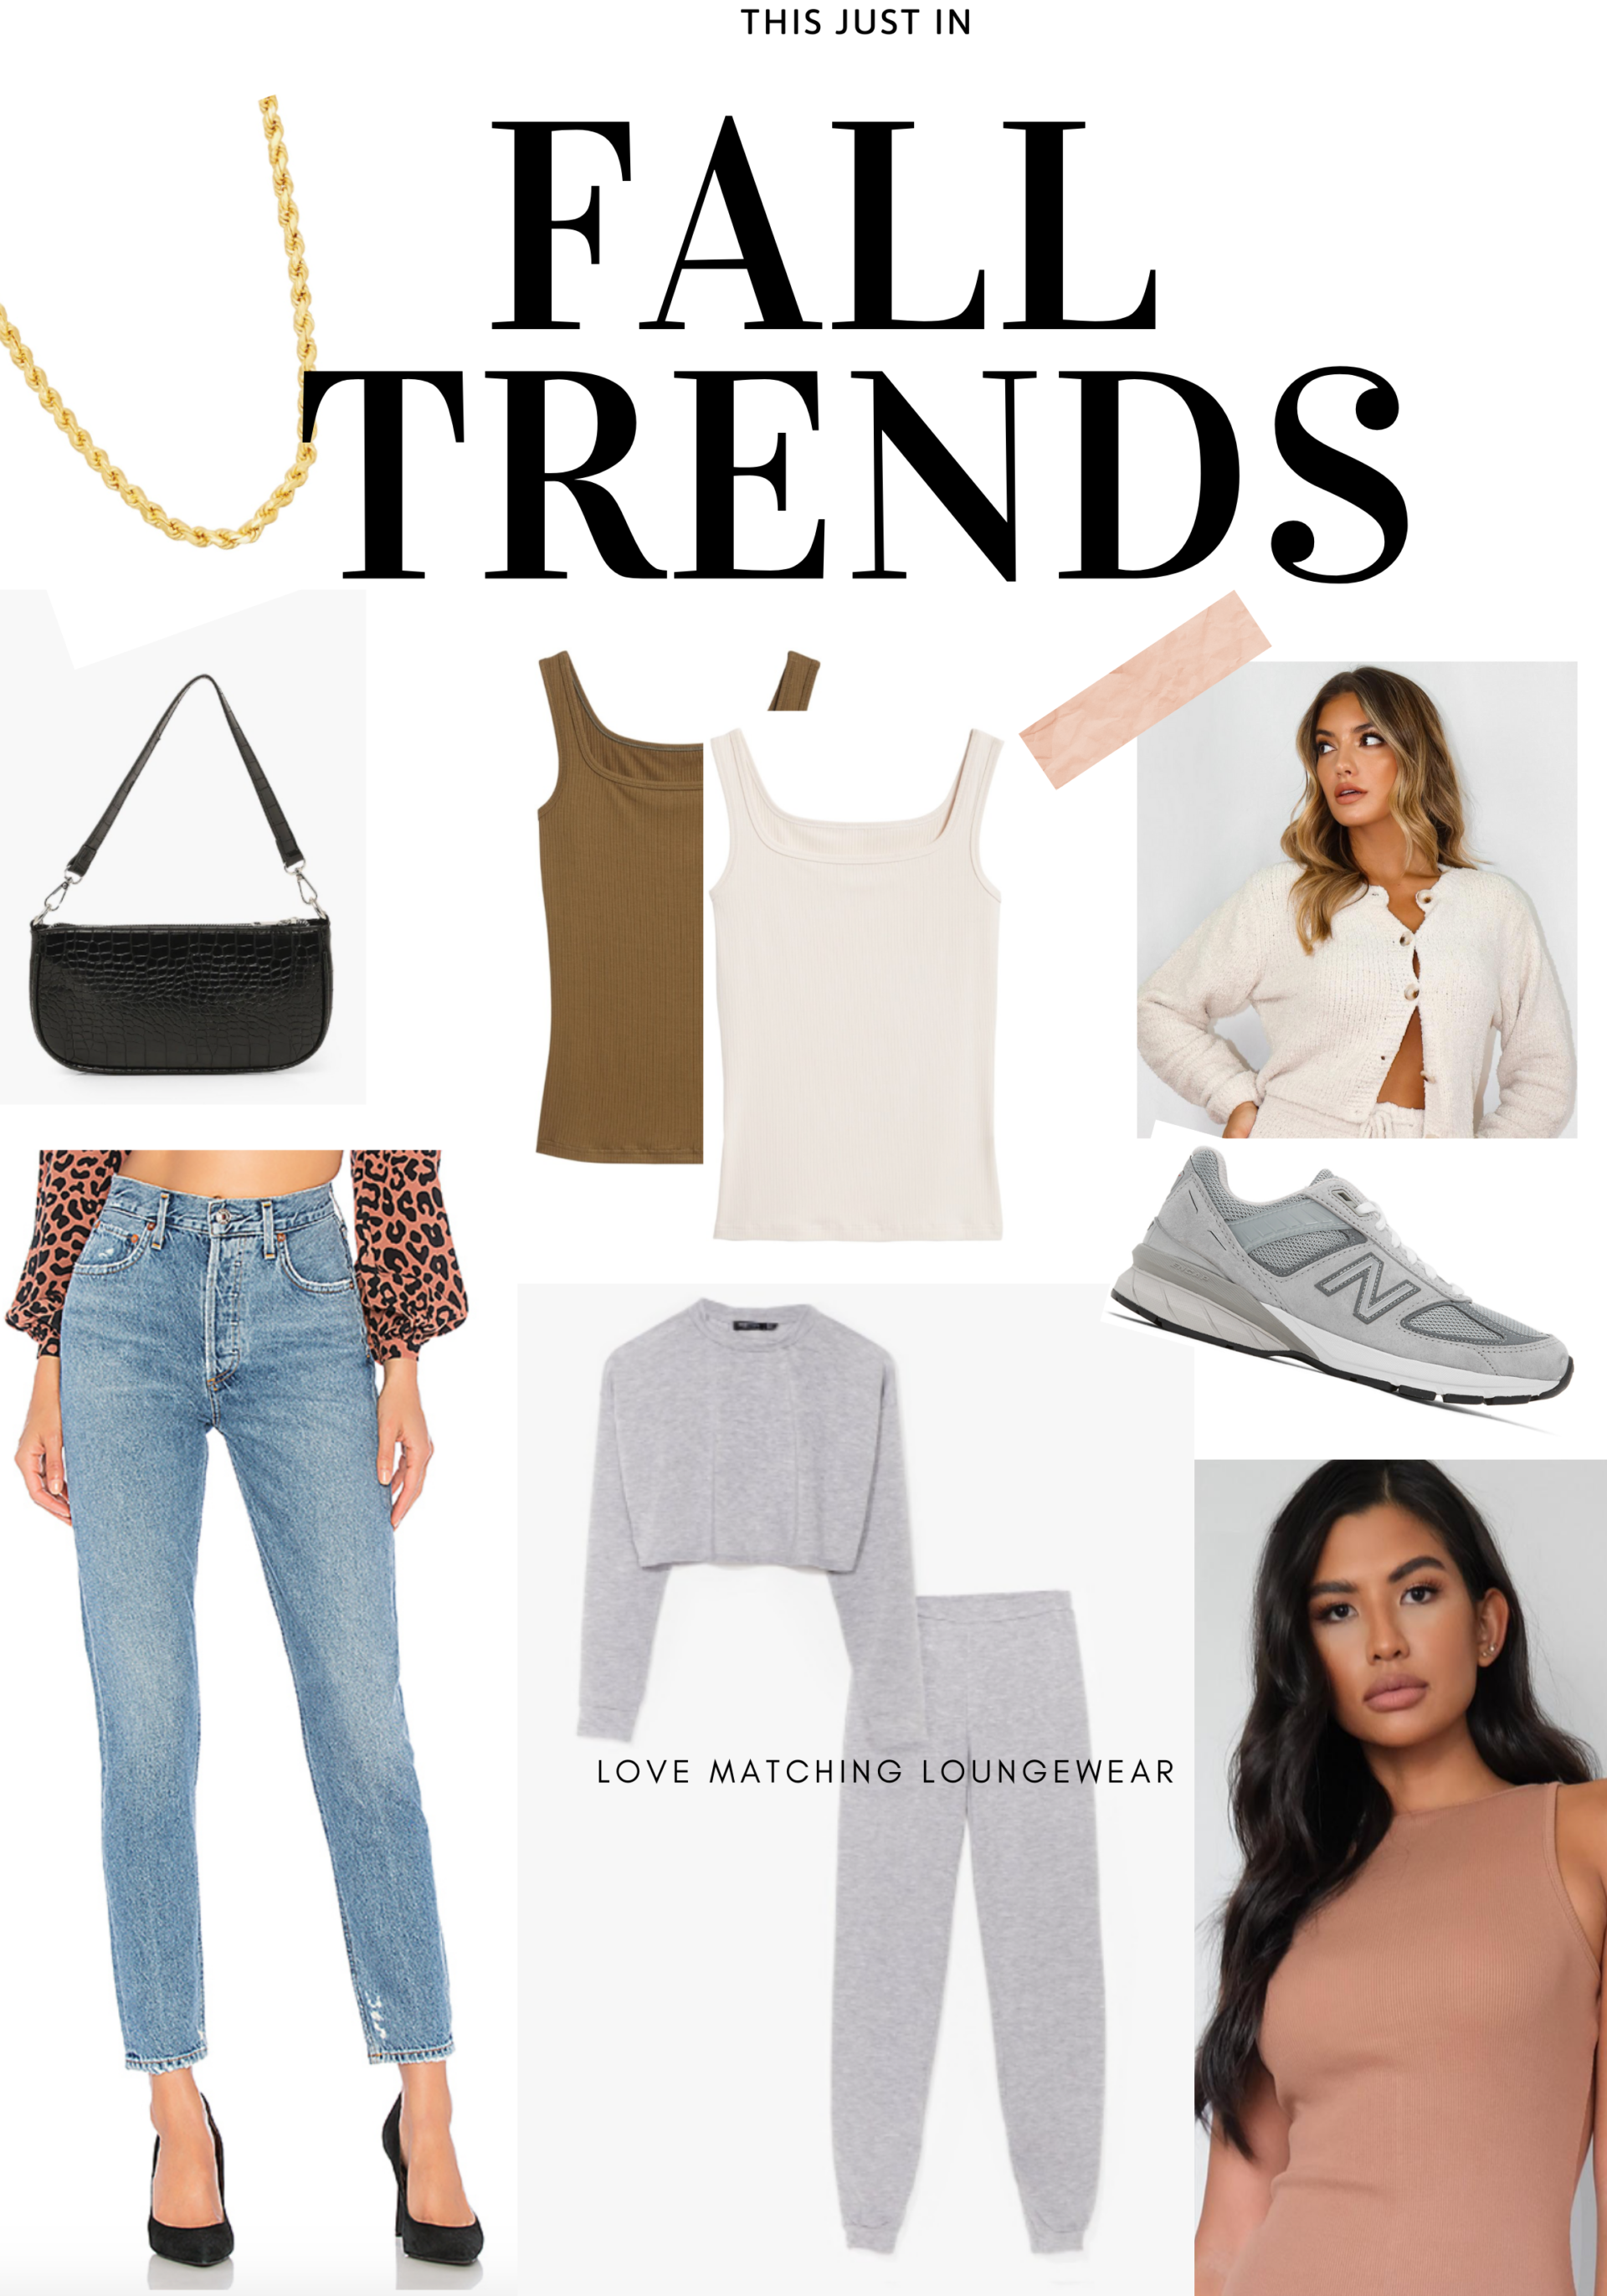 Fall Fashion: Trends for the Season